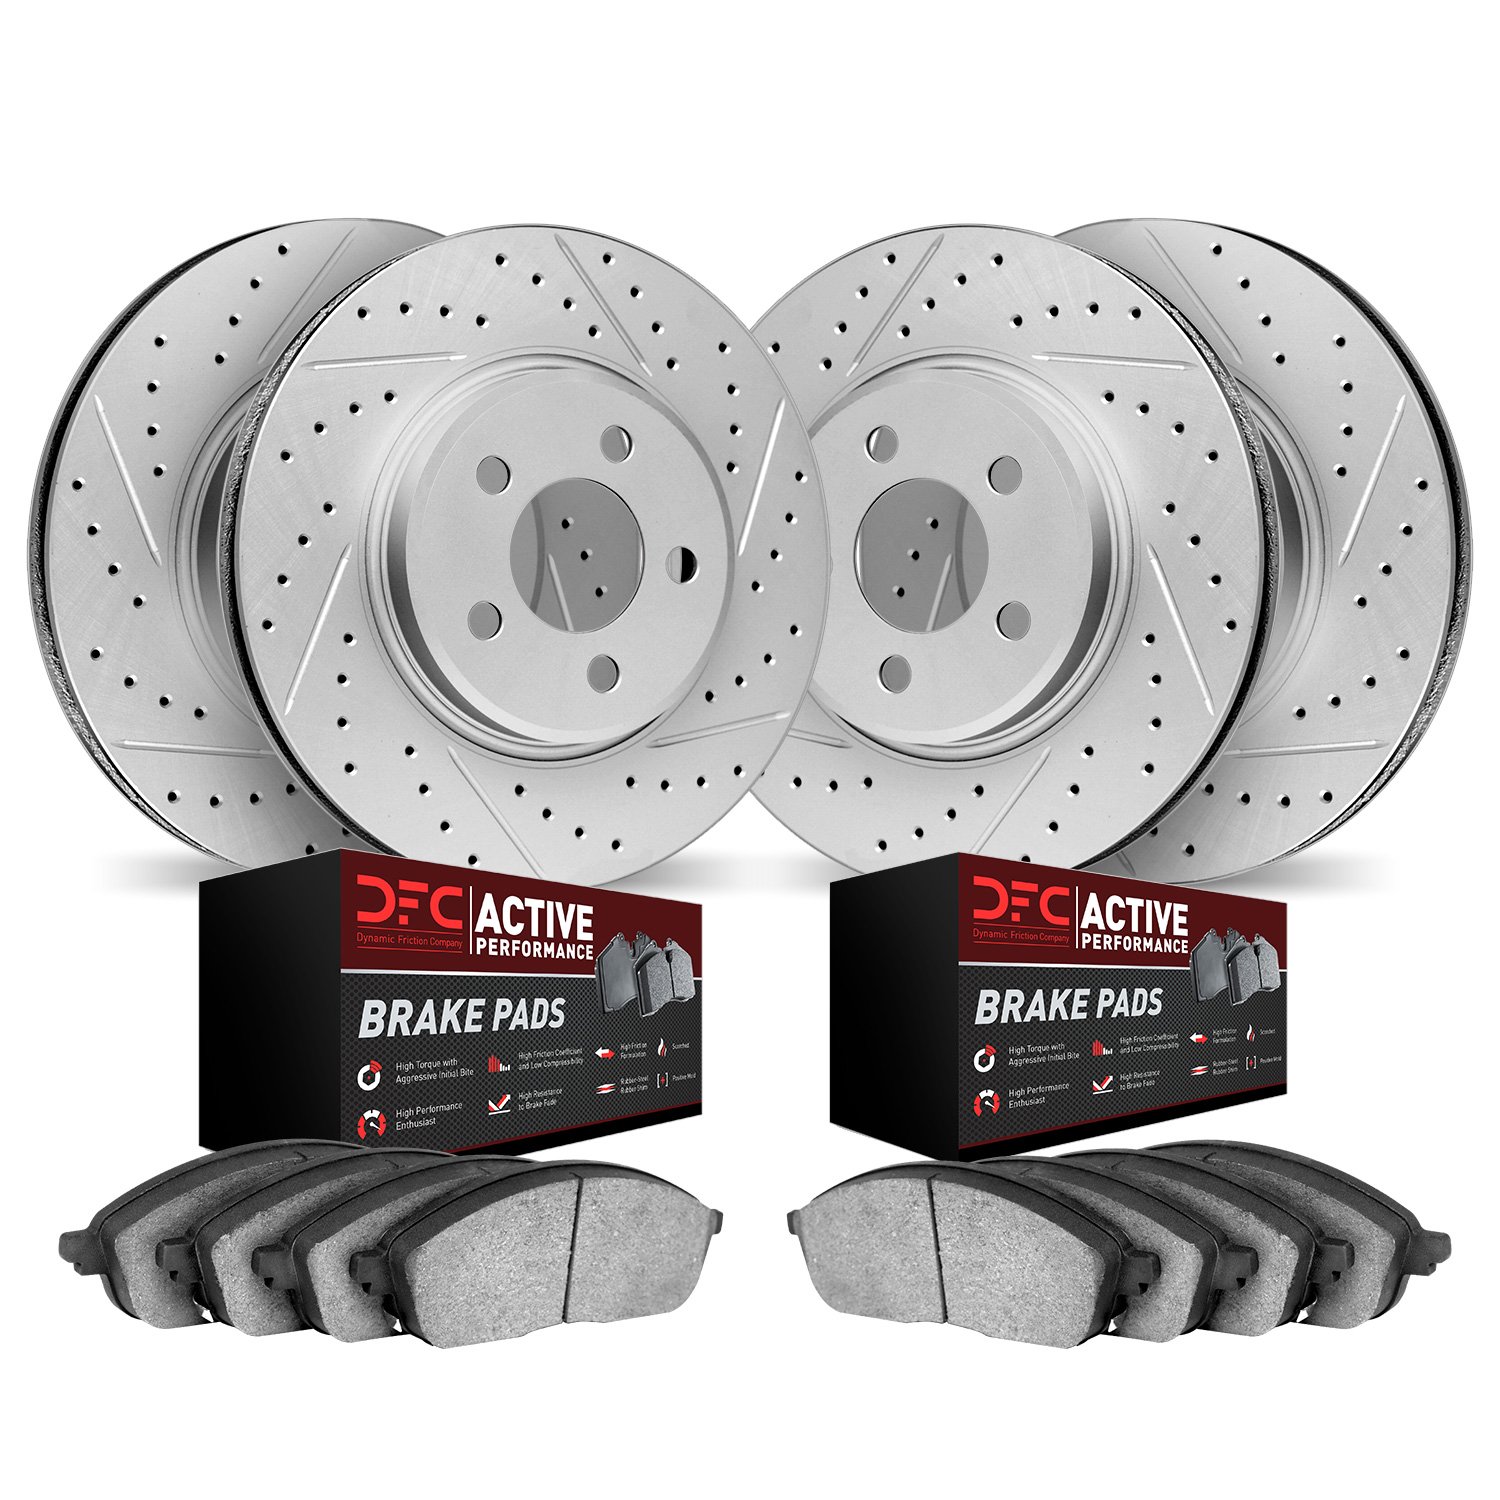 2704-31044 Geoperformance Drilled/Slotted Brake Rotors with Active Performance Pads Kit, 2006-2008 BMW, Position: Front and Rear